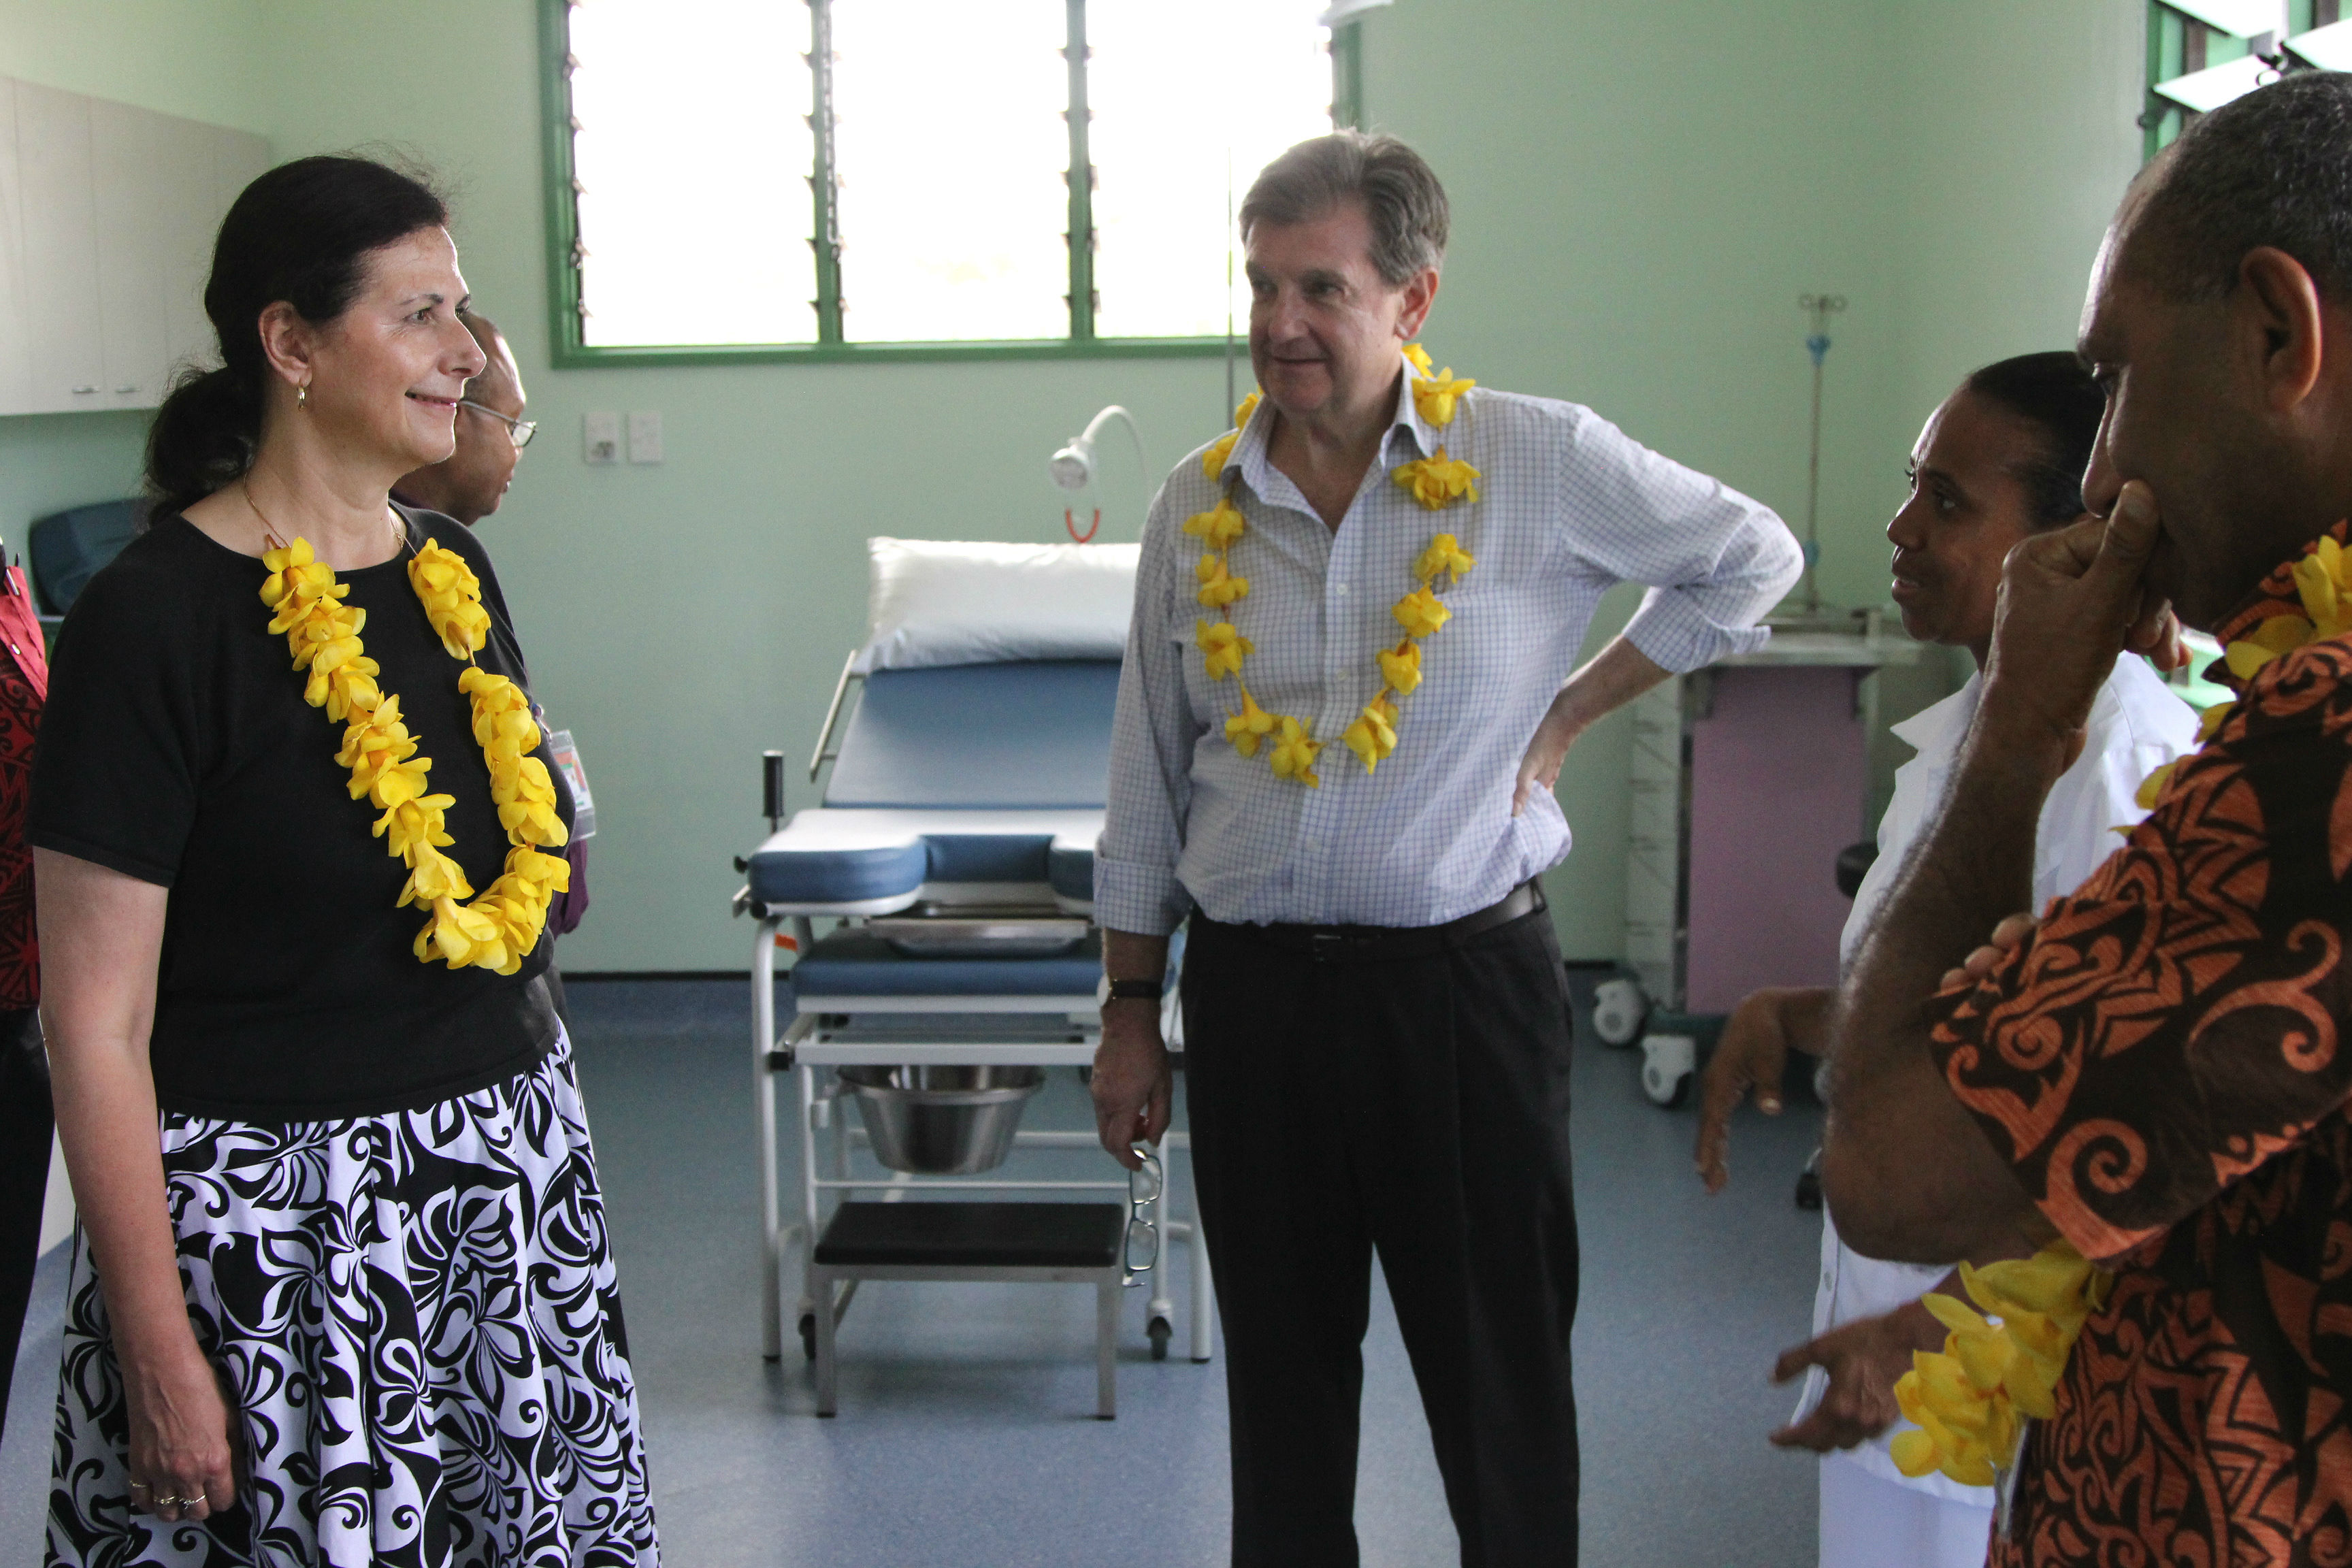 Minister for International Development and the Pacific Sen. Concetta Fierravanti-Wells visits Bubuleta Community Health Post in Milne Bay Province, which is providing quality maternal and child health services. Australia, Papua New Guinea and other partners will build a total of 32 health posts throughout Papua New Guinea under the Rural Primary Health Service Delivery Project.